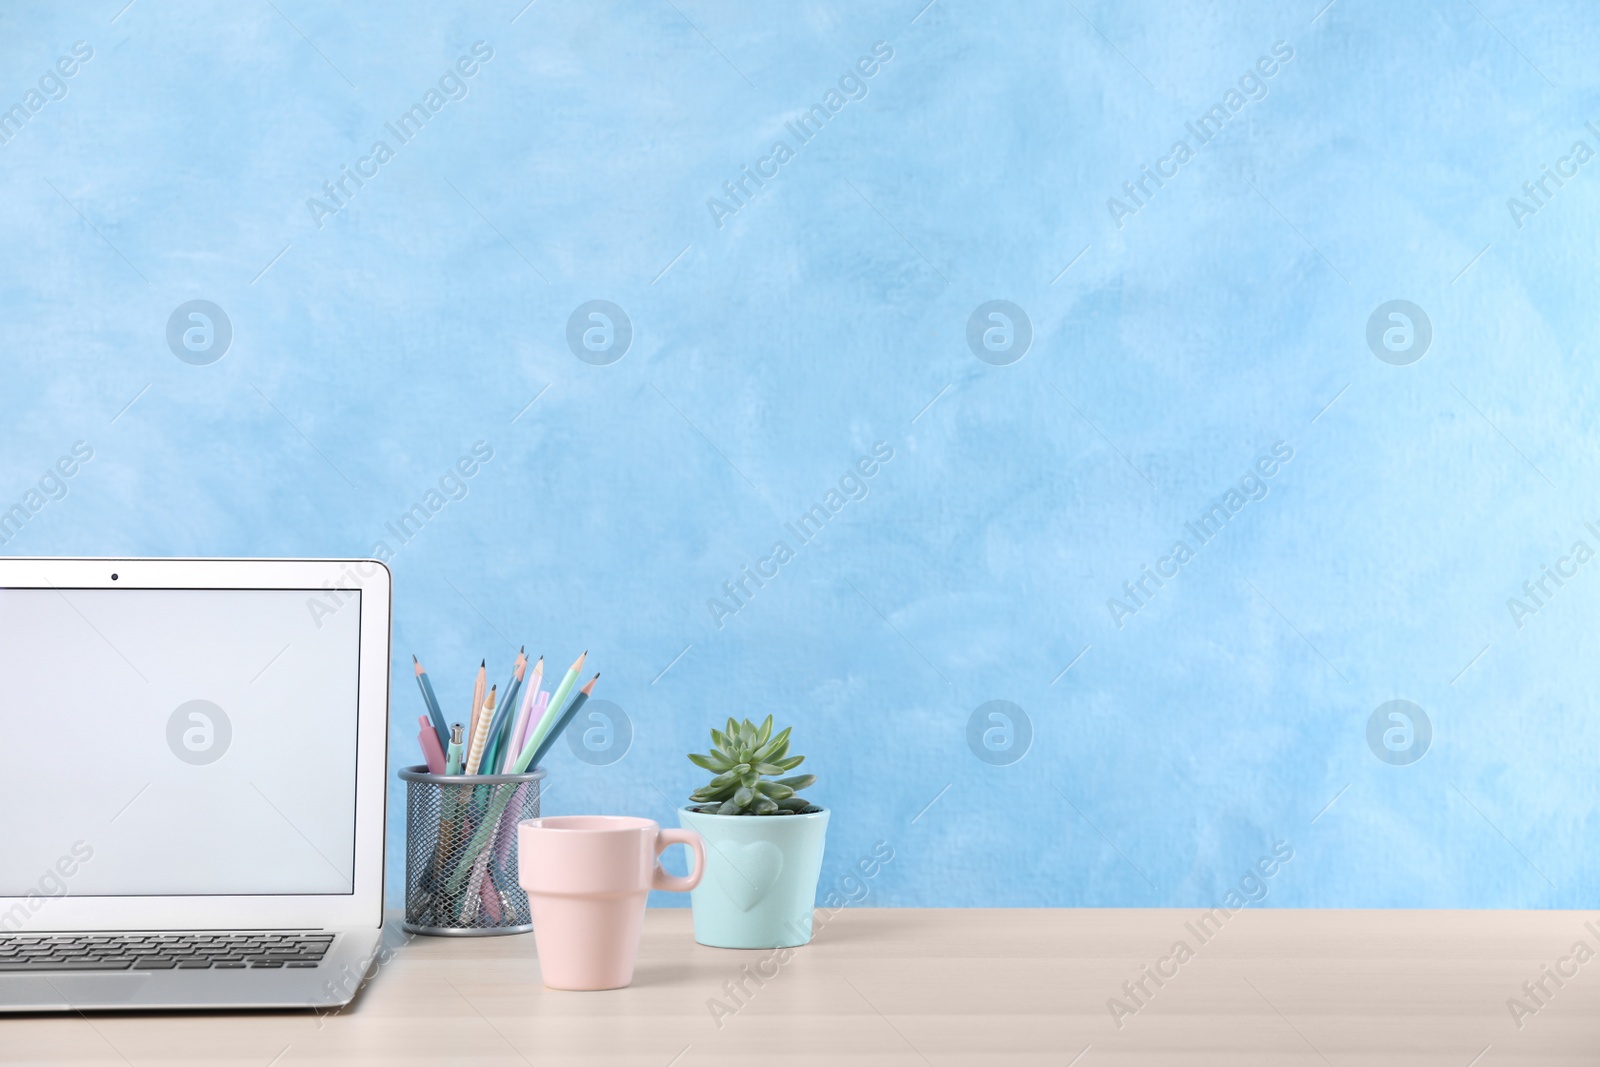 Photo of Modern laptop with blank screen, cup and office supplies on white table near light blue wall, space for text